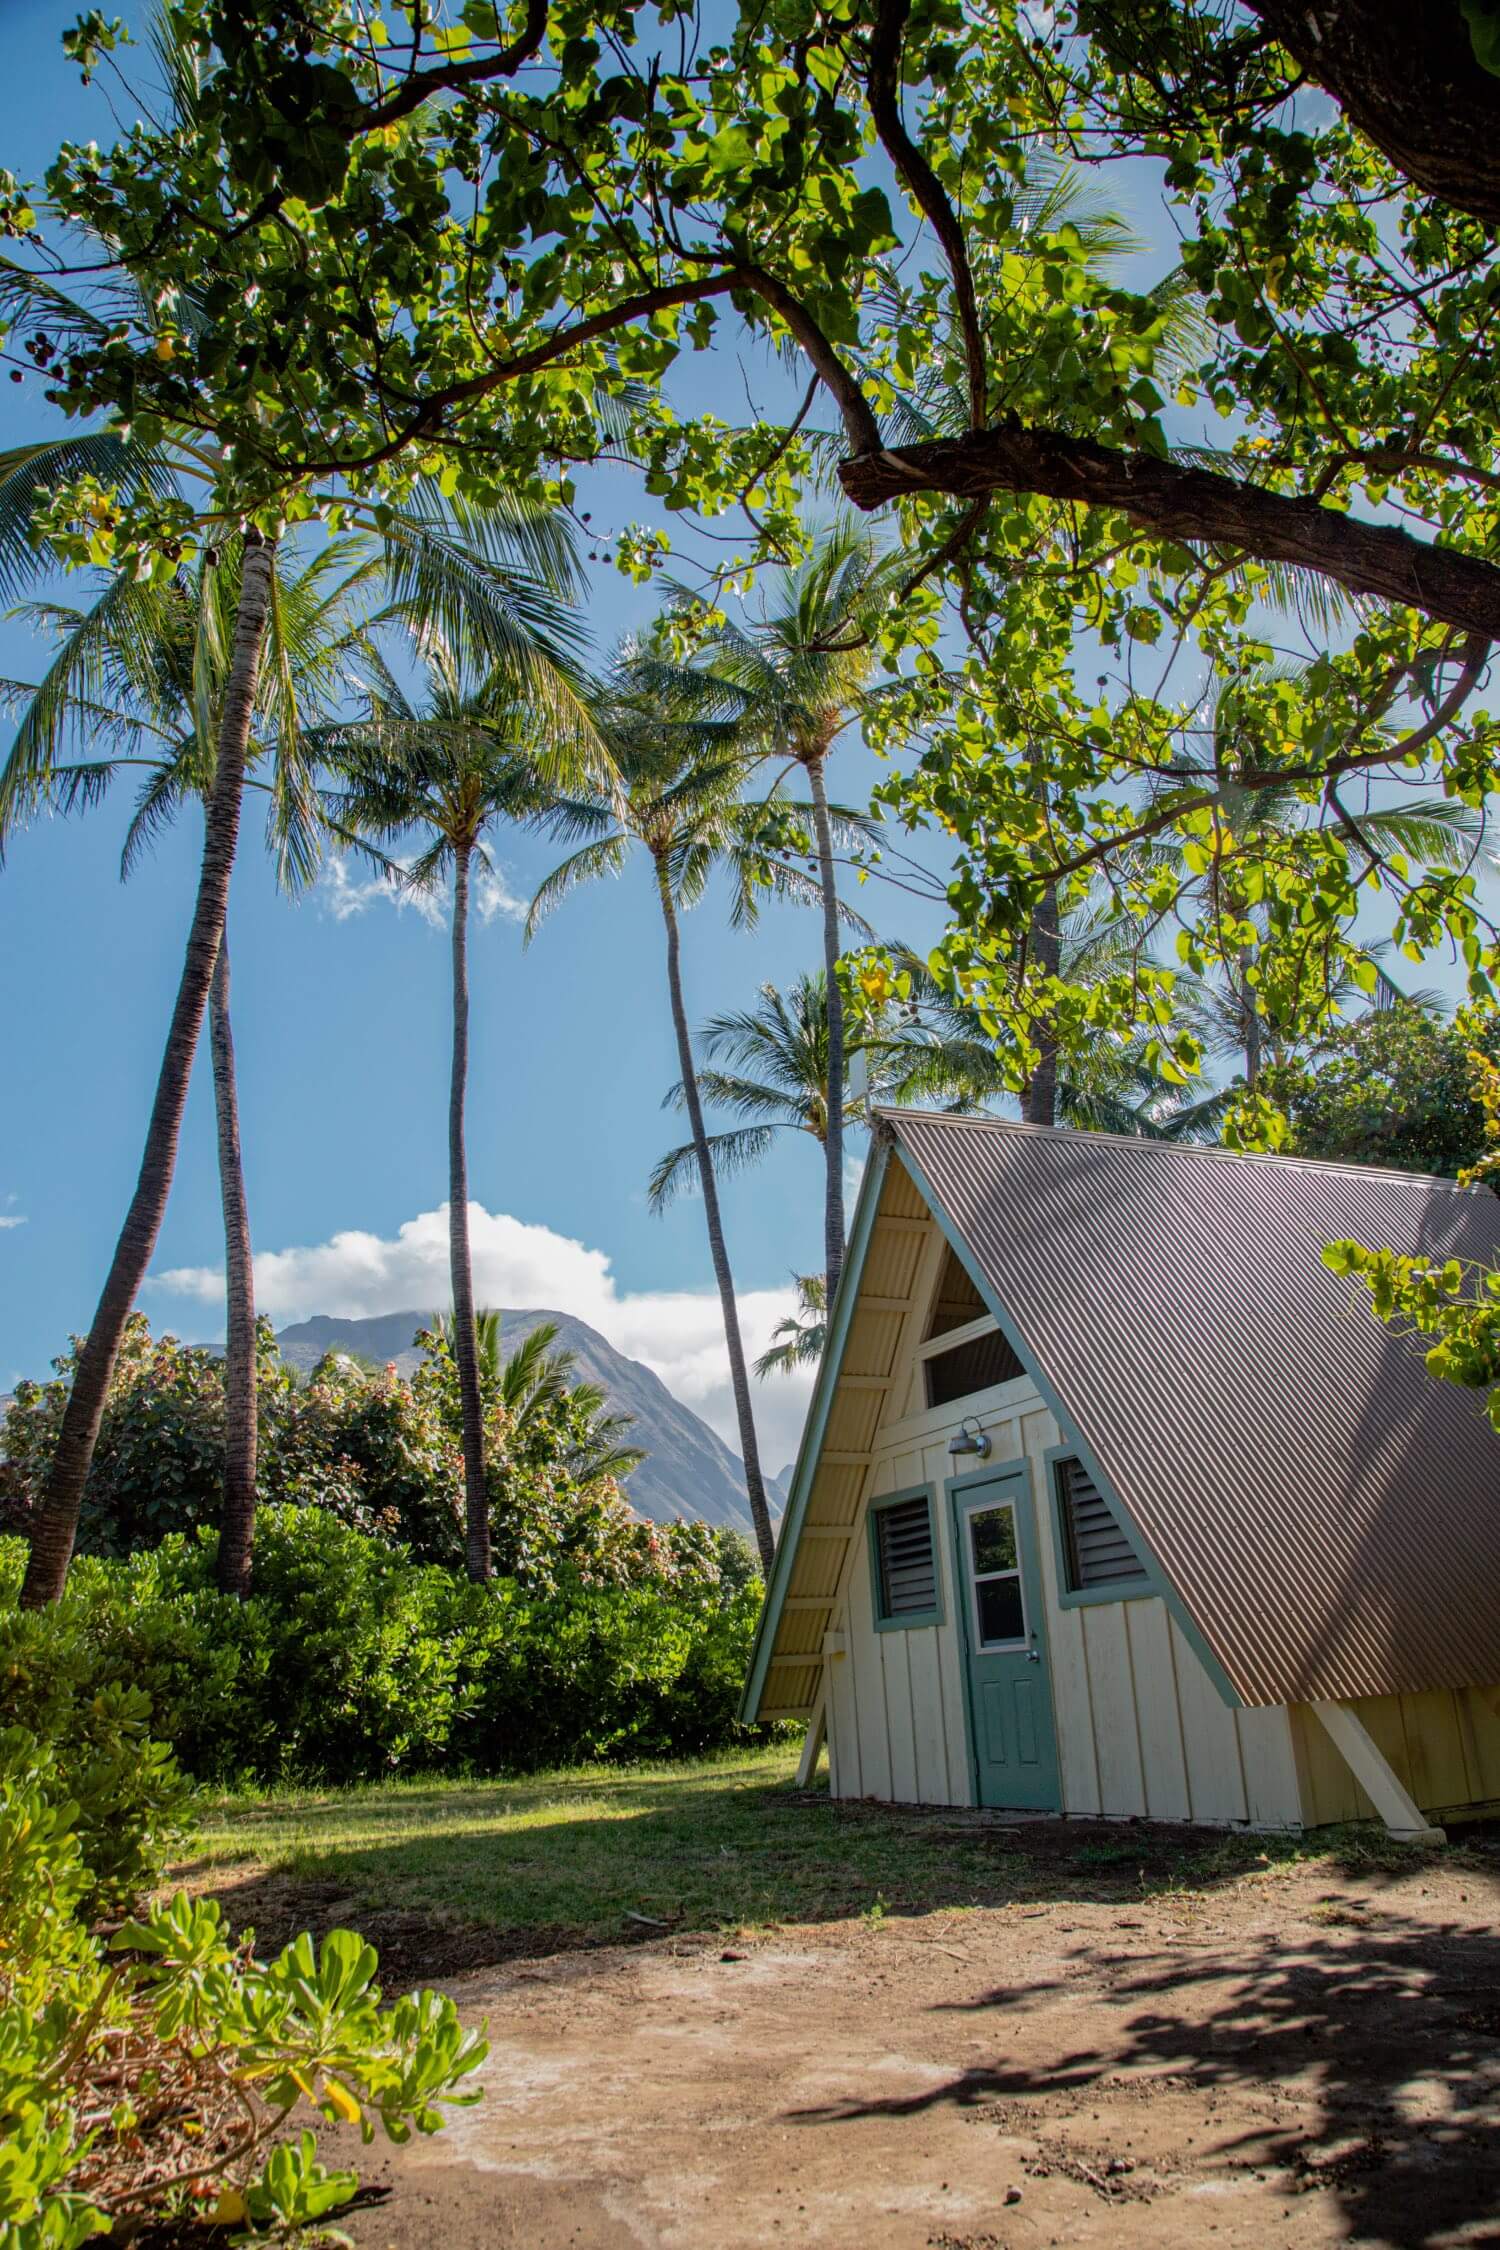 Camp Olowalu cabins with the West Maui Mountains in the background